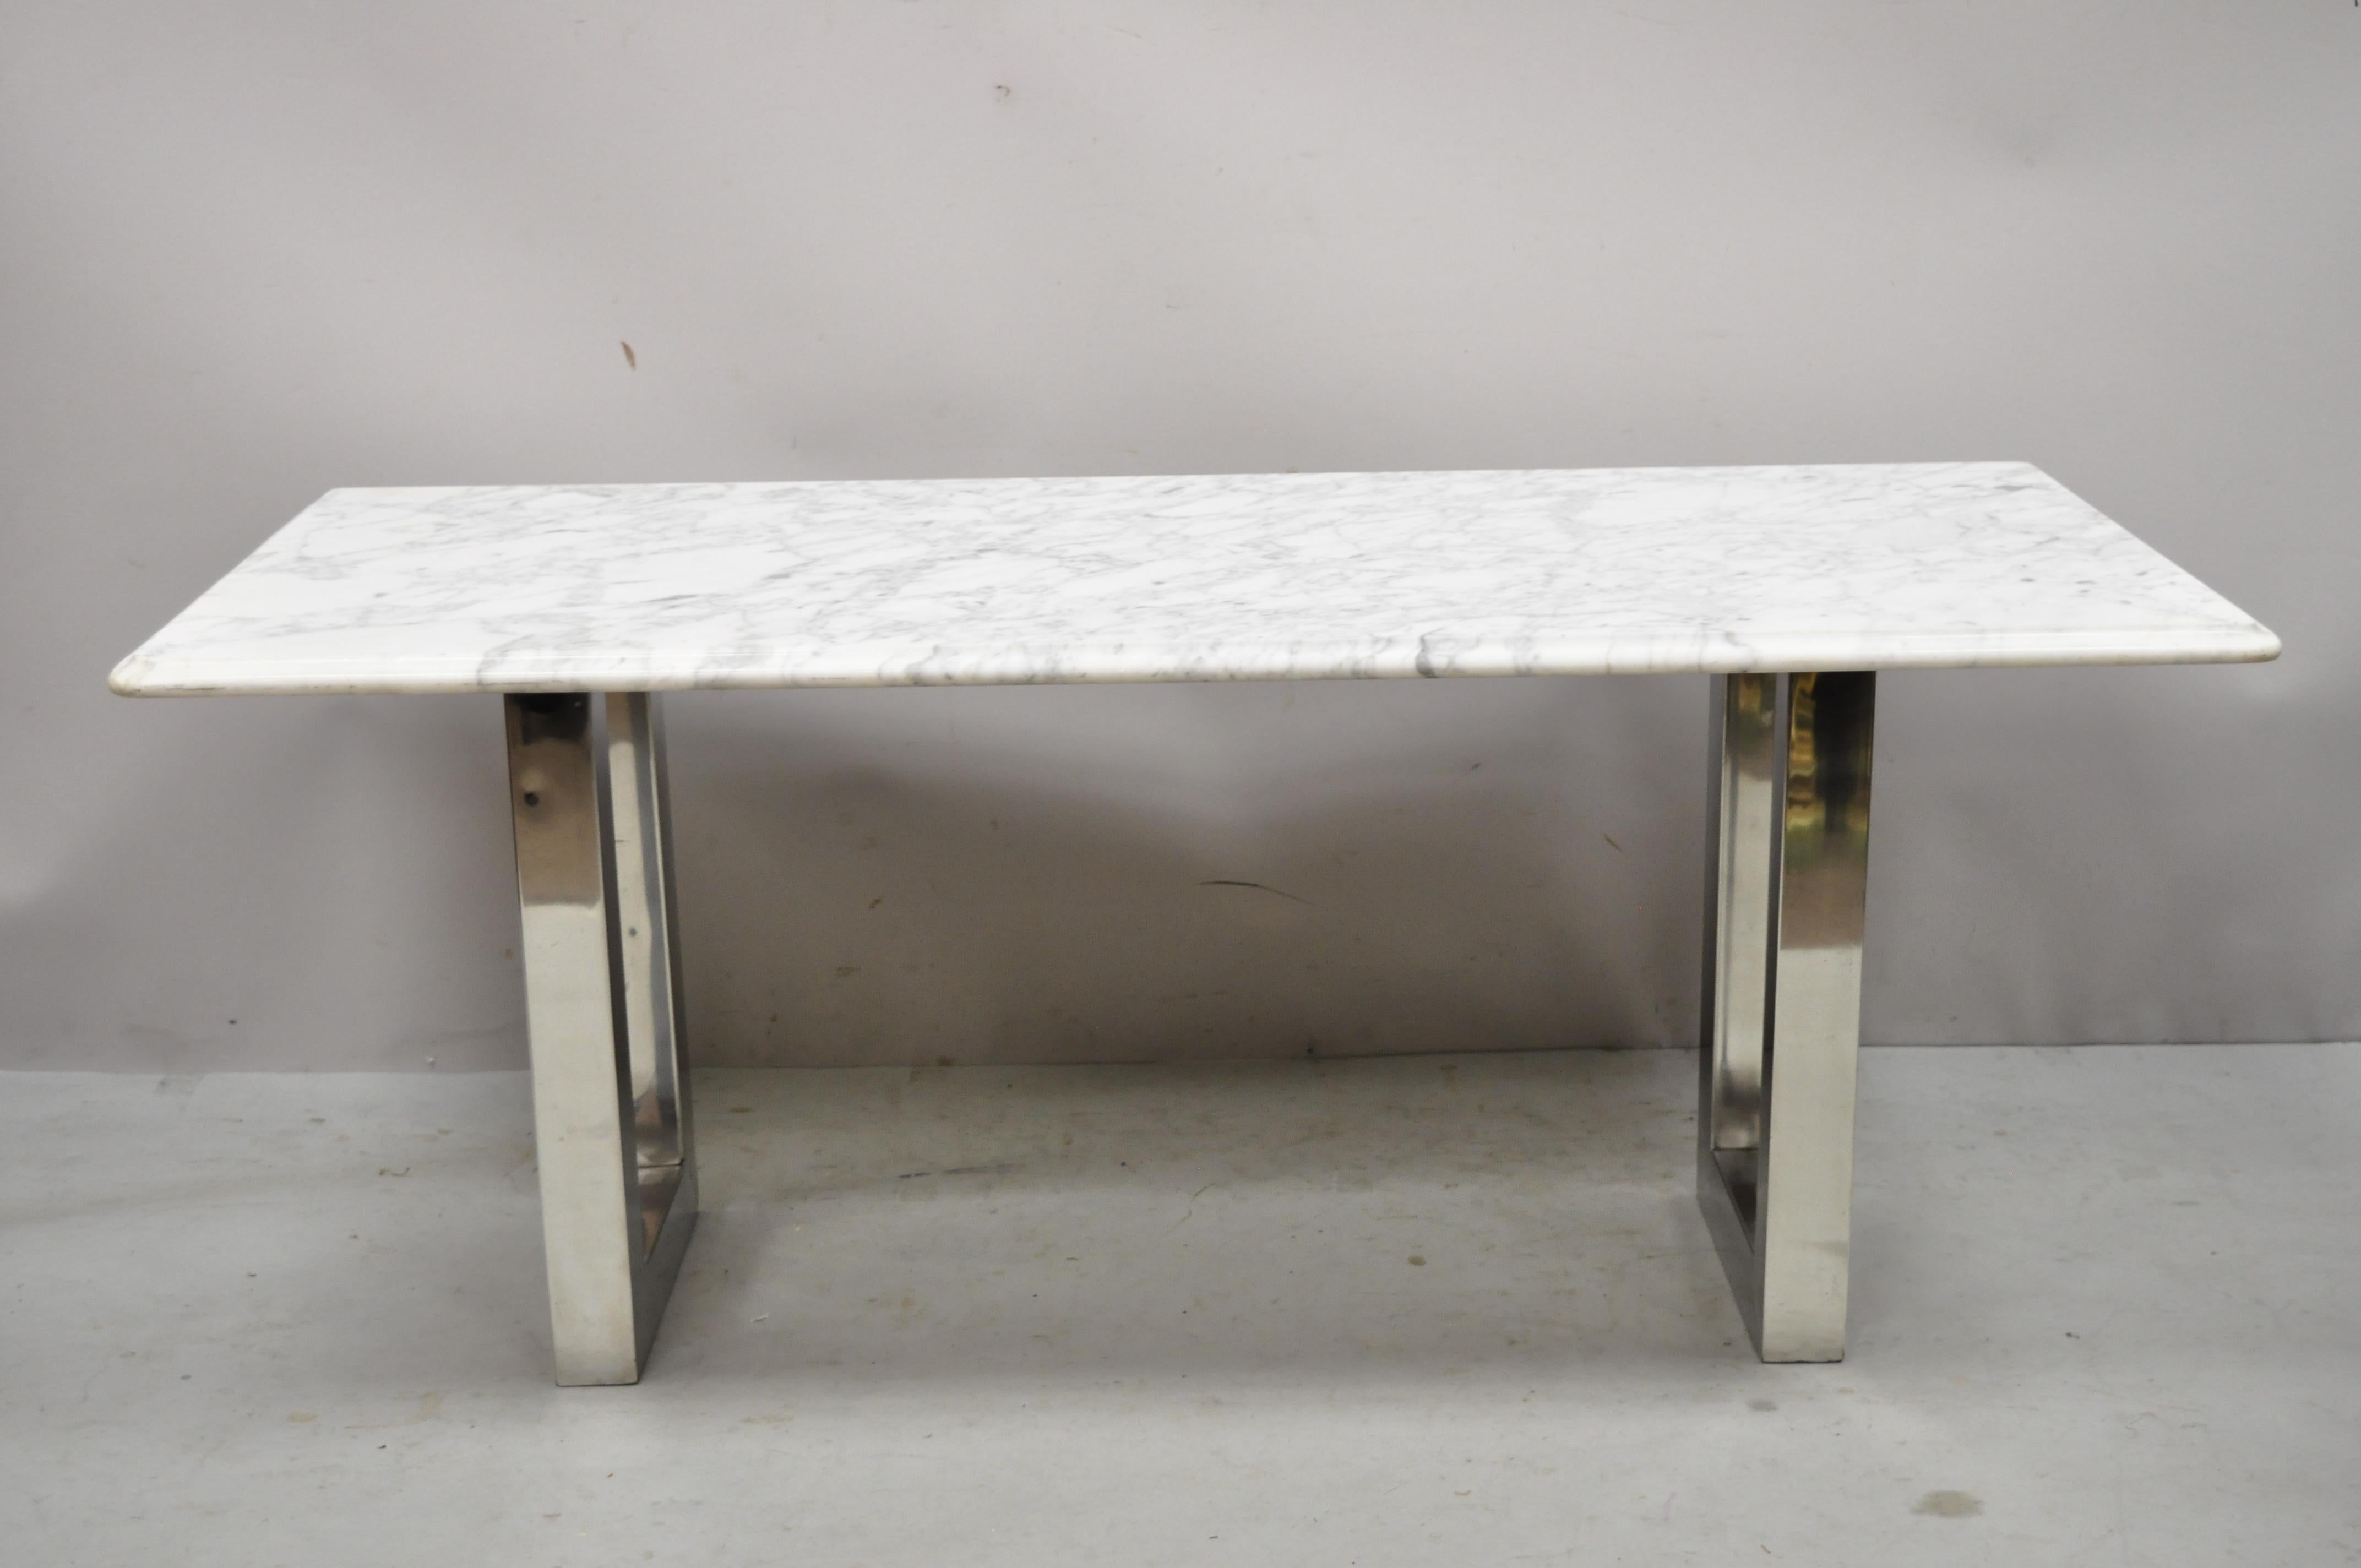 Modern Italian marble chrome double pedestal base rectangular coffee table. Item features Italian marble top, chrome double pedestal, clean modernist lines, great style and form. Circa Late 20th - Early 21st century. Measurements: 19